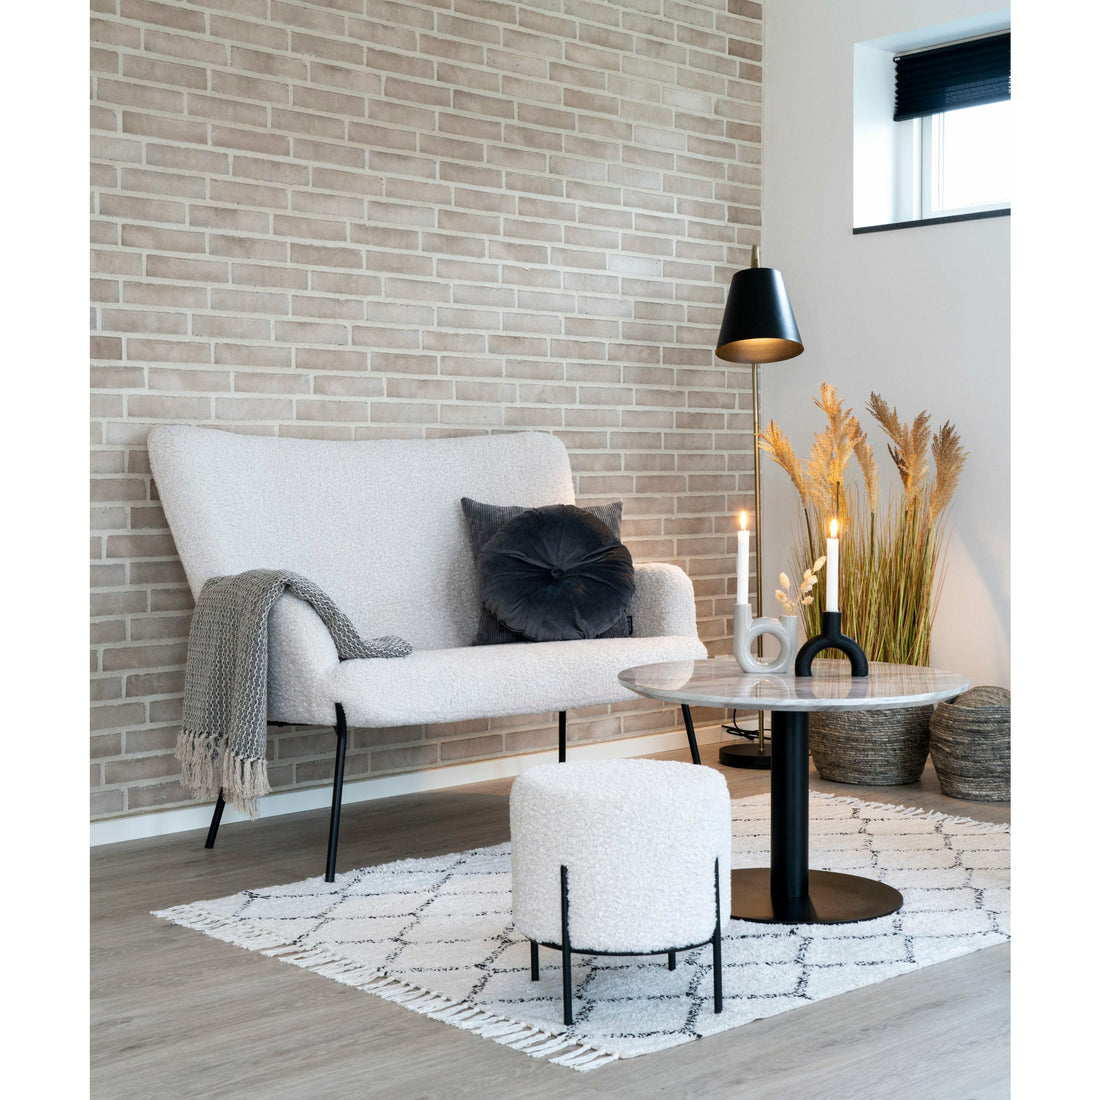 Bolzano Coffee table - Coffee table with top in marble look and black leg Ø70x45cm - 1 - pcs